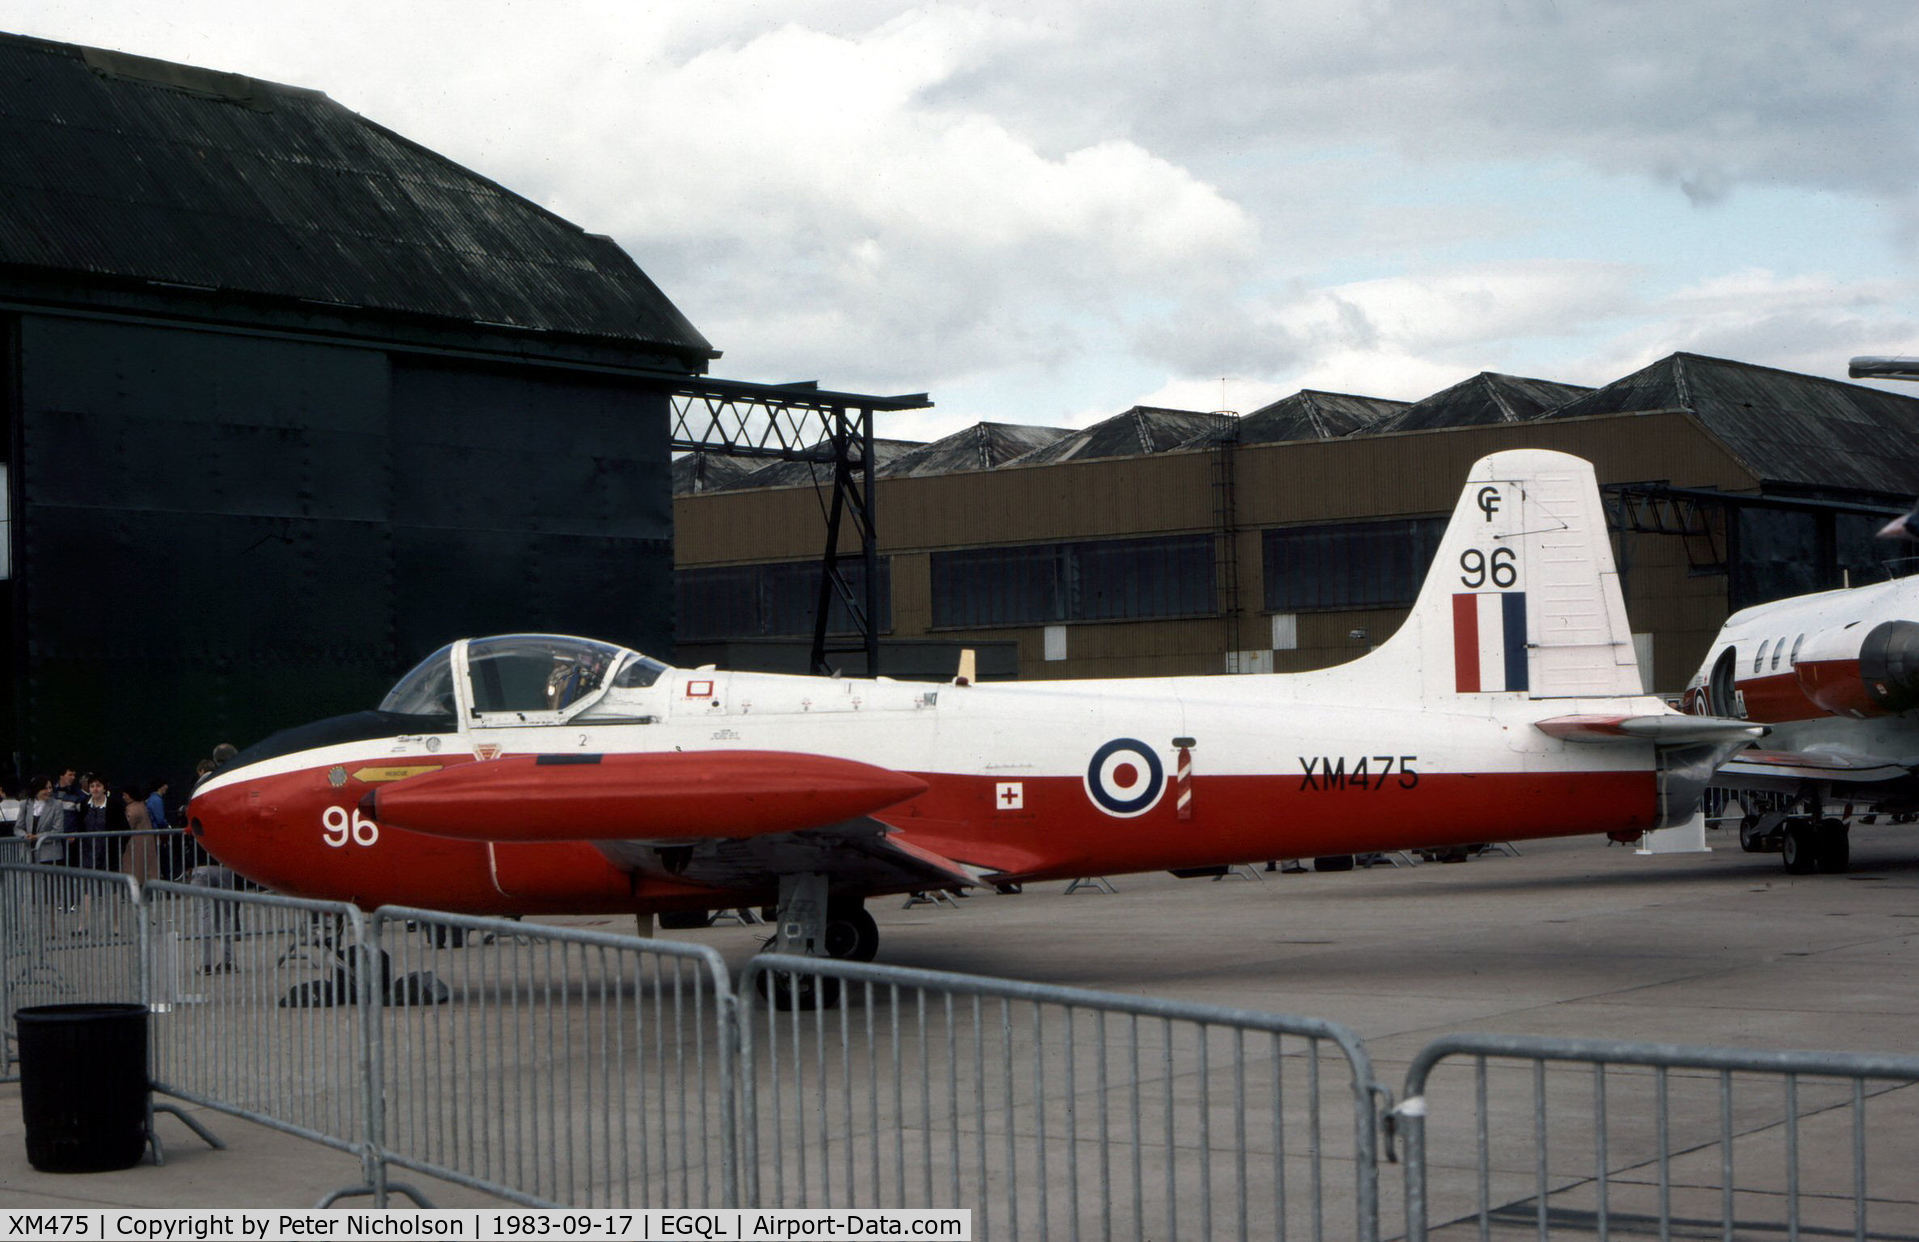 XM475, 1960 Hunting P-84 Jet Provost T.3A C/N PAC/W/9283, Jet Provost T.3A of 7 Flying Training School on display at the 1983 RAF Leuchars Airshow.